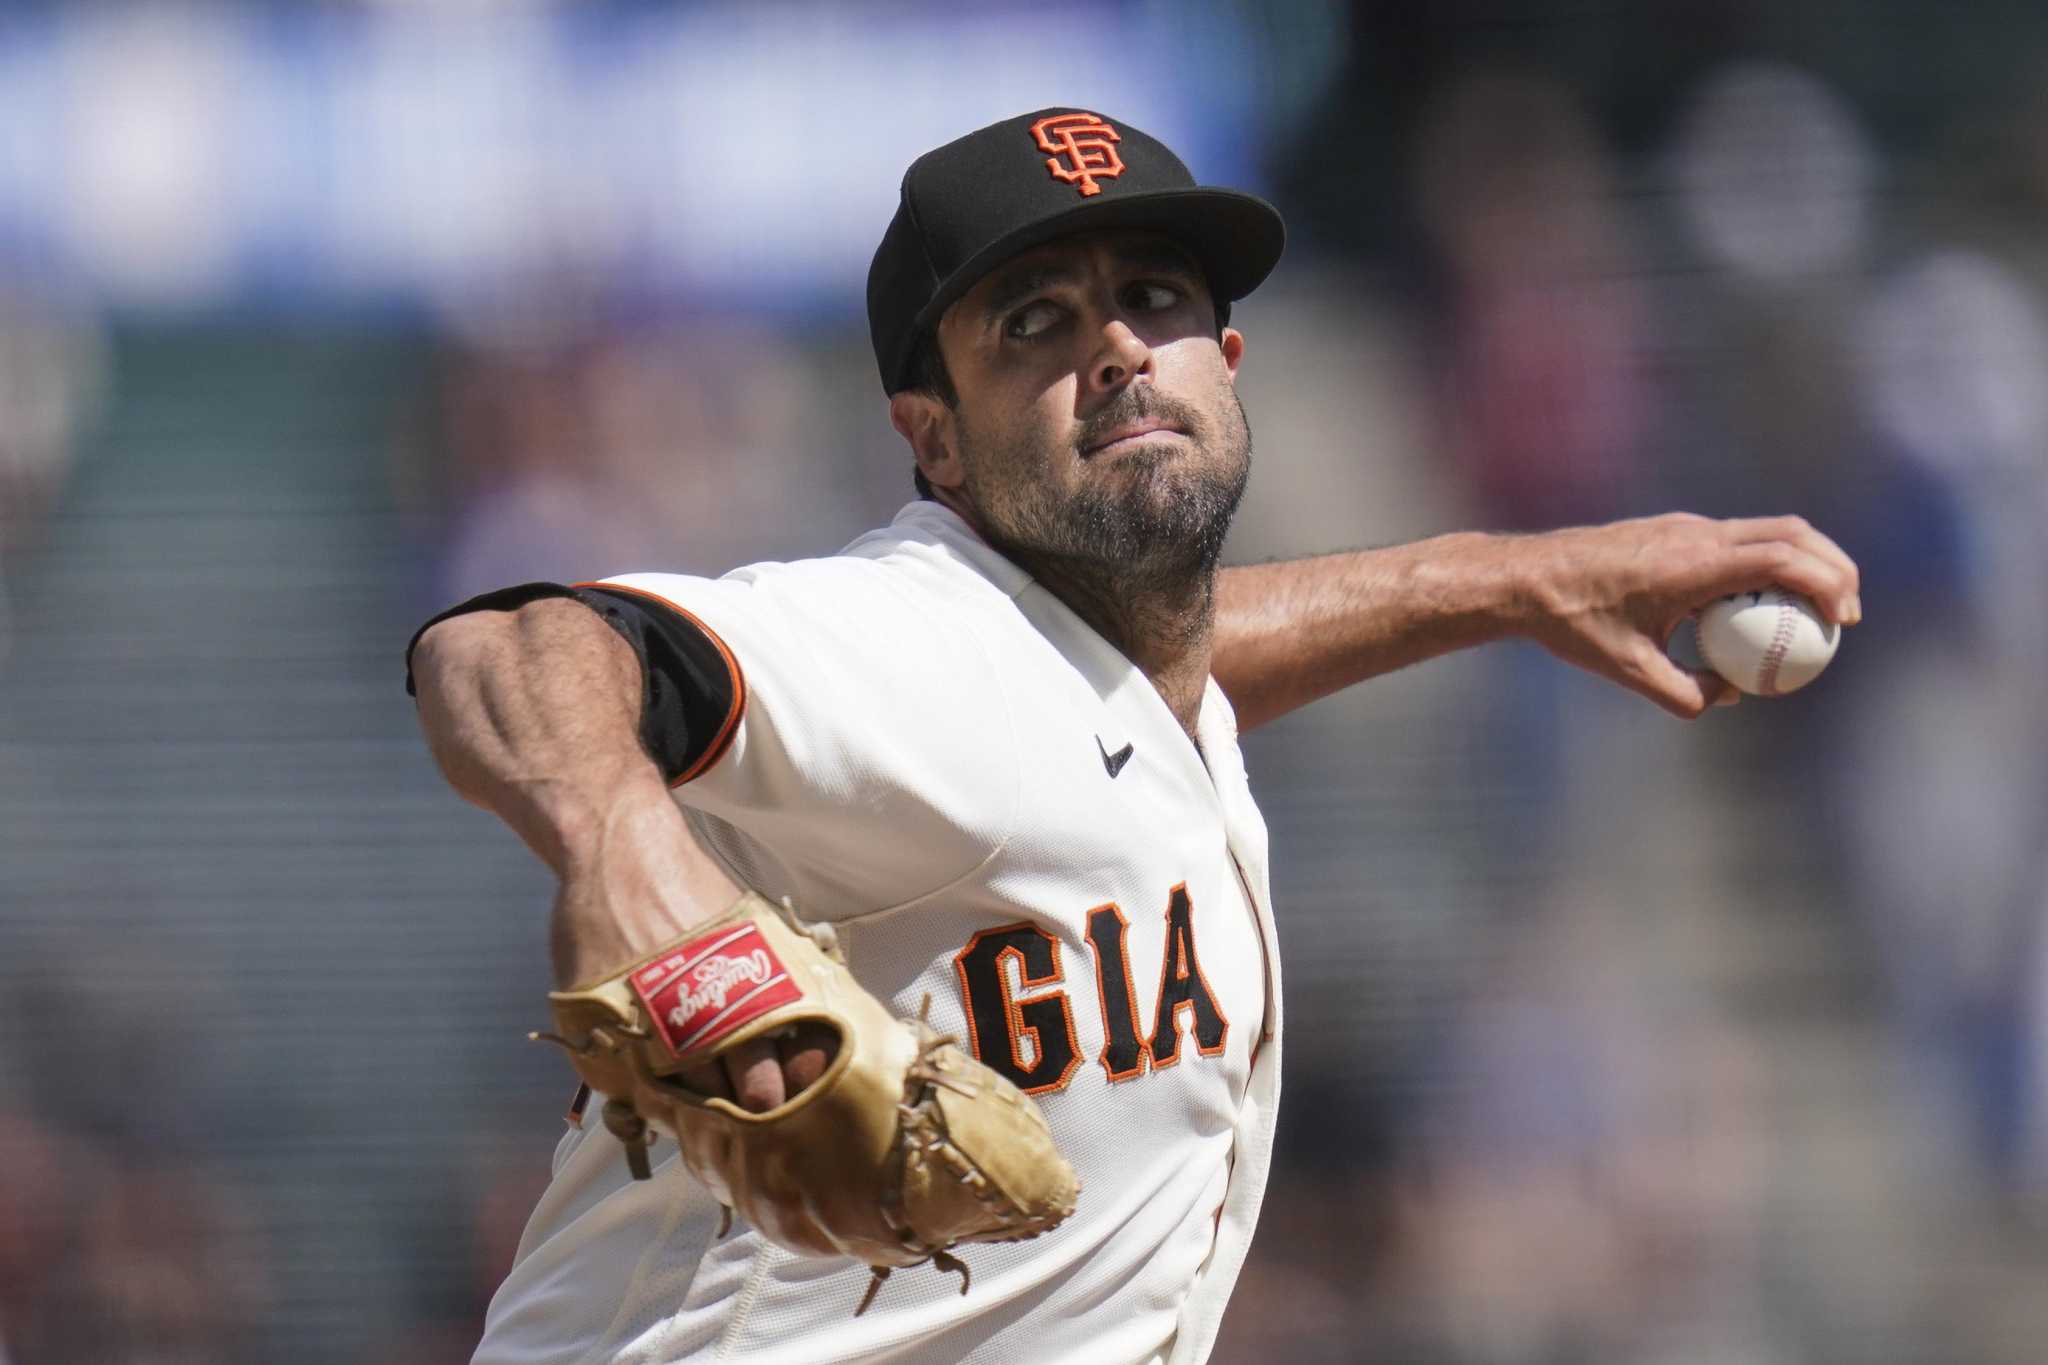 Giants officially out of wild-card race after loss; Logan Webb